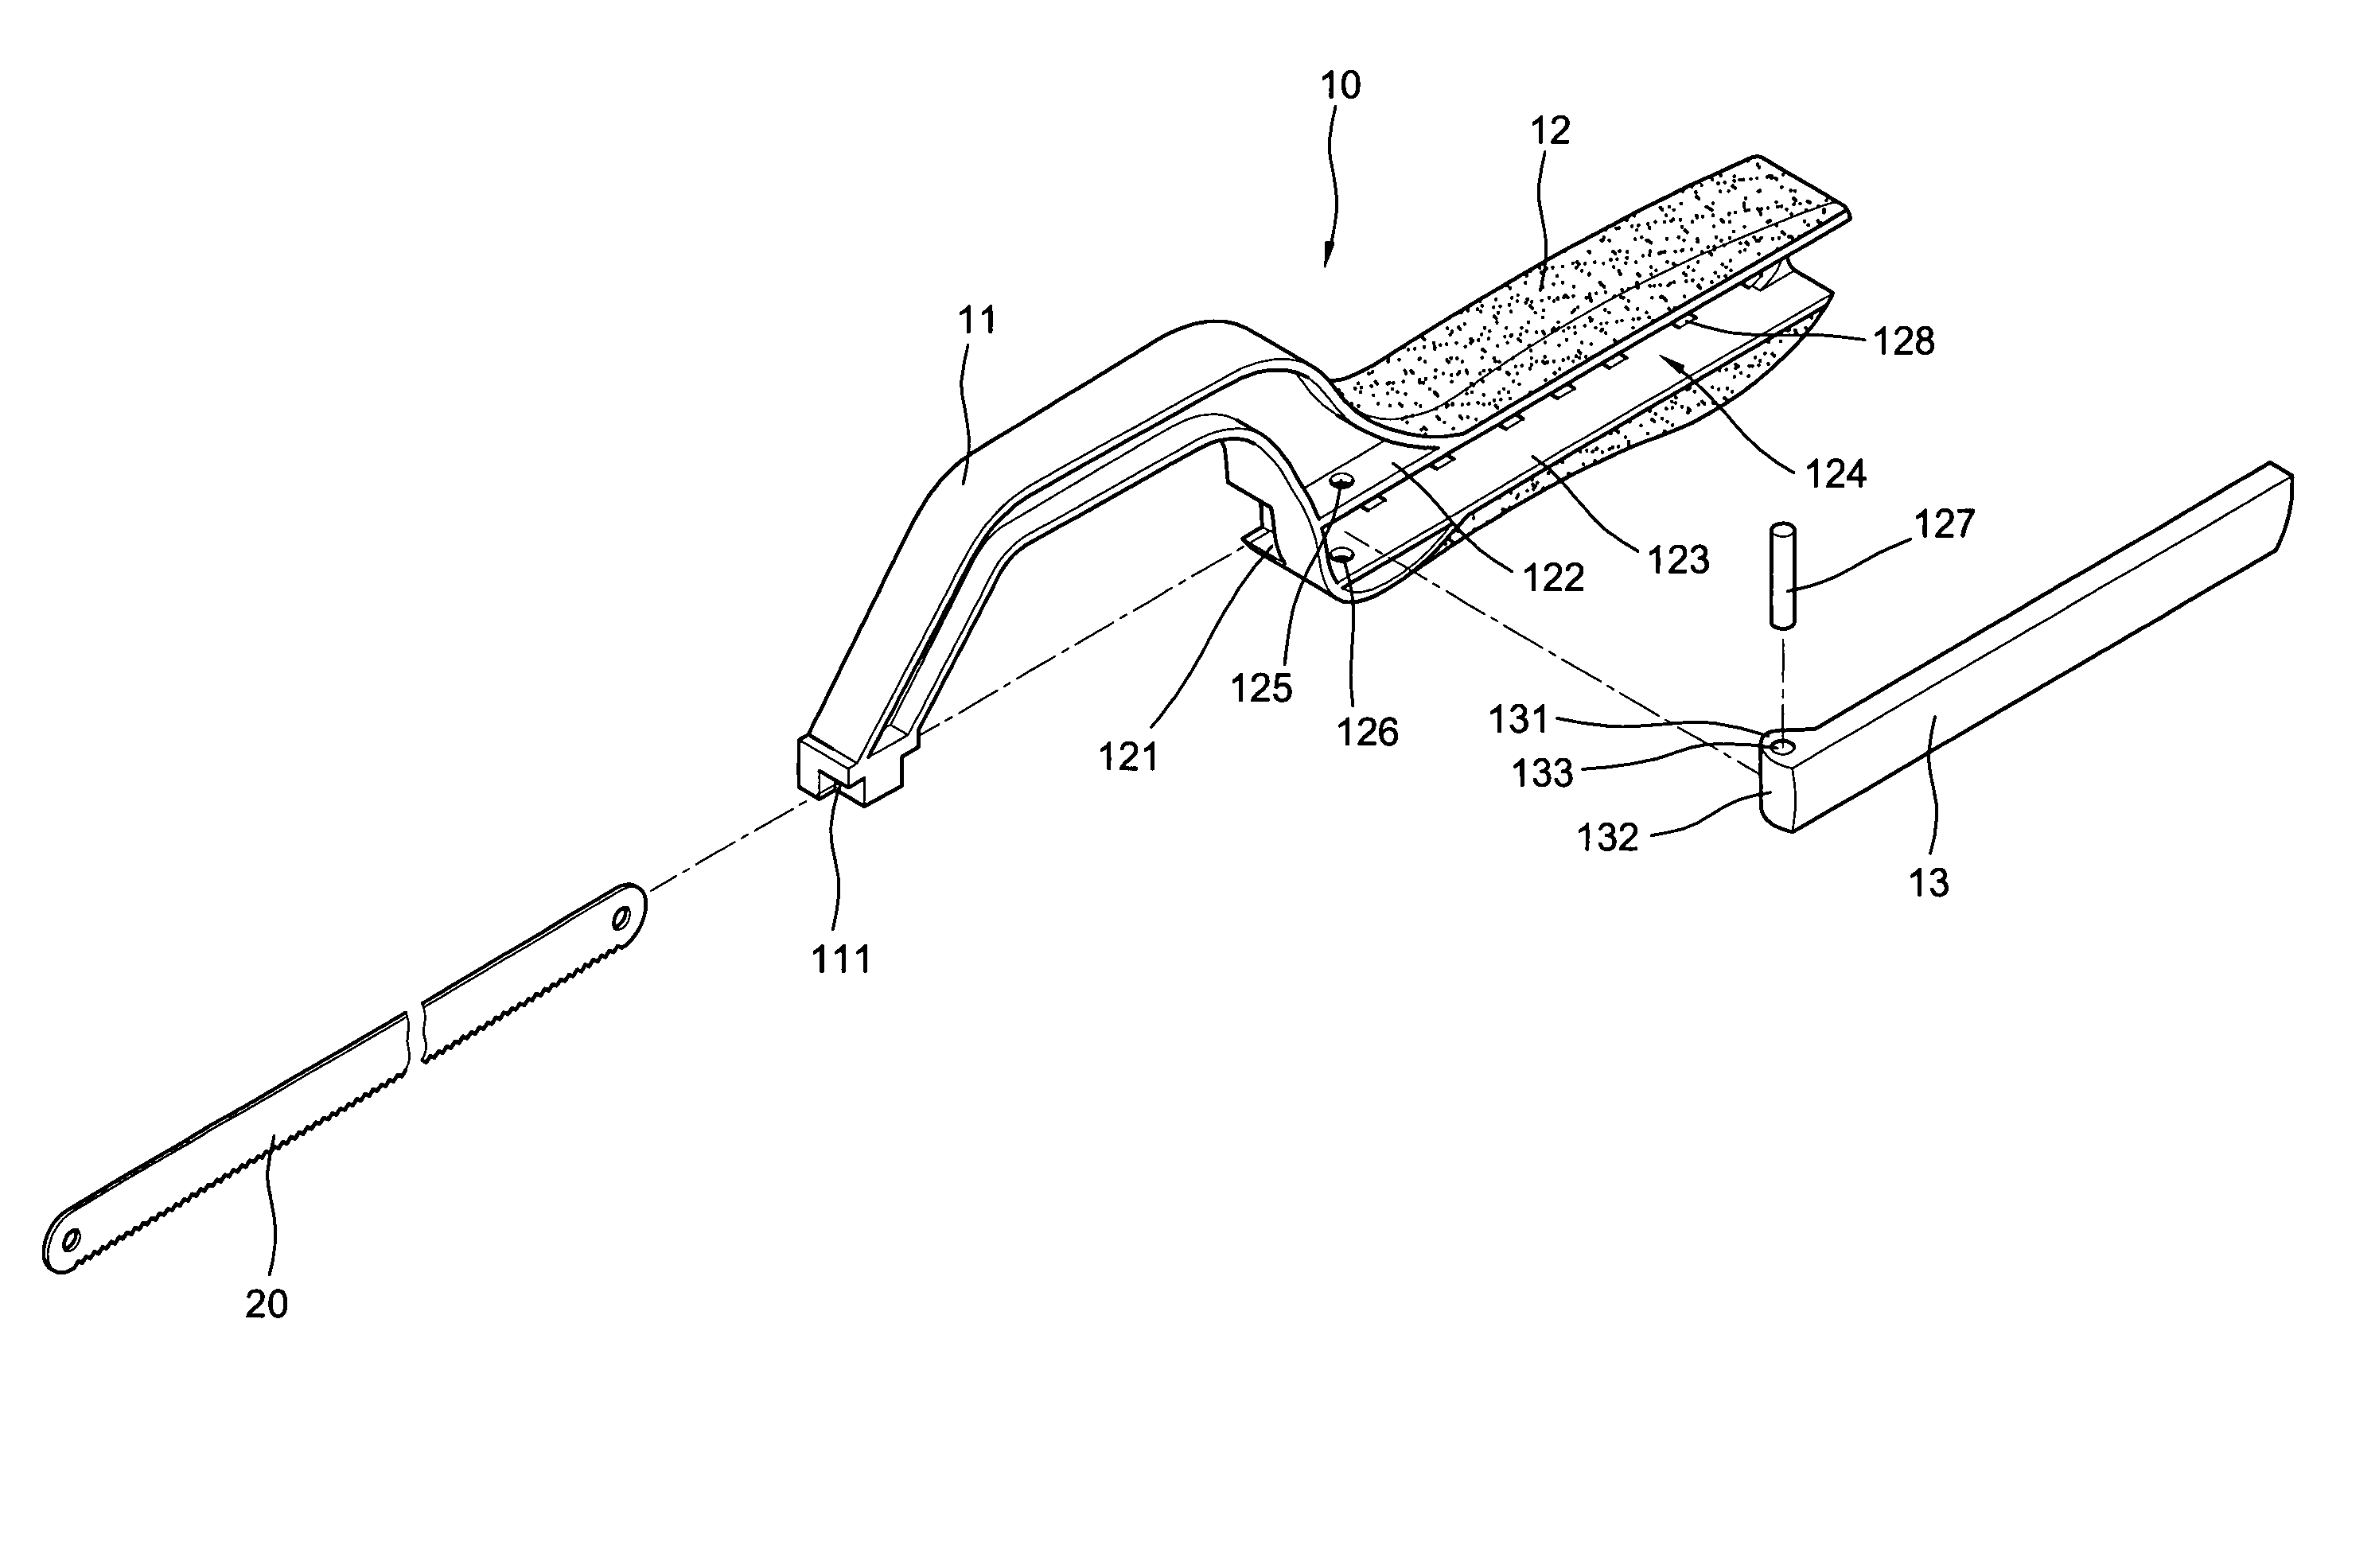 Structure of a miniature hacksaw